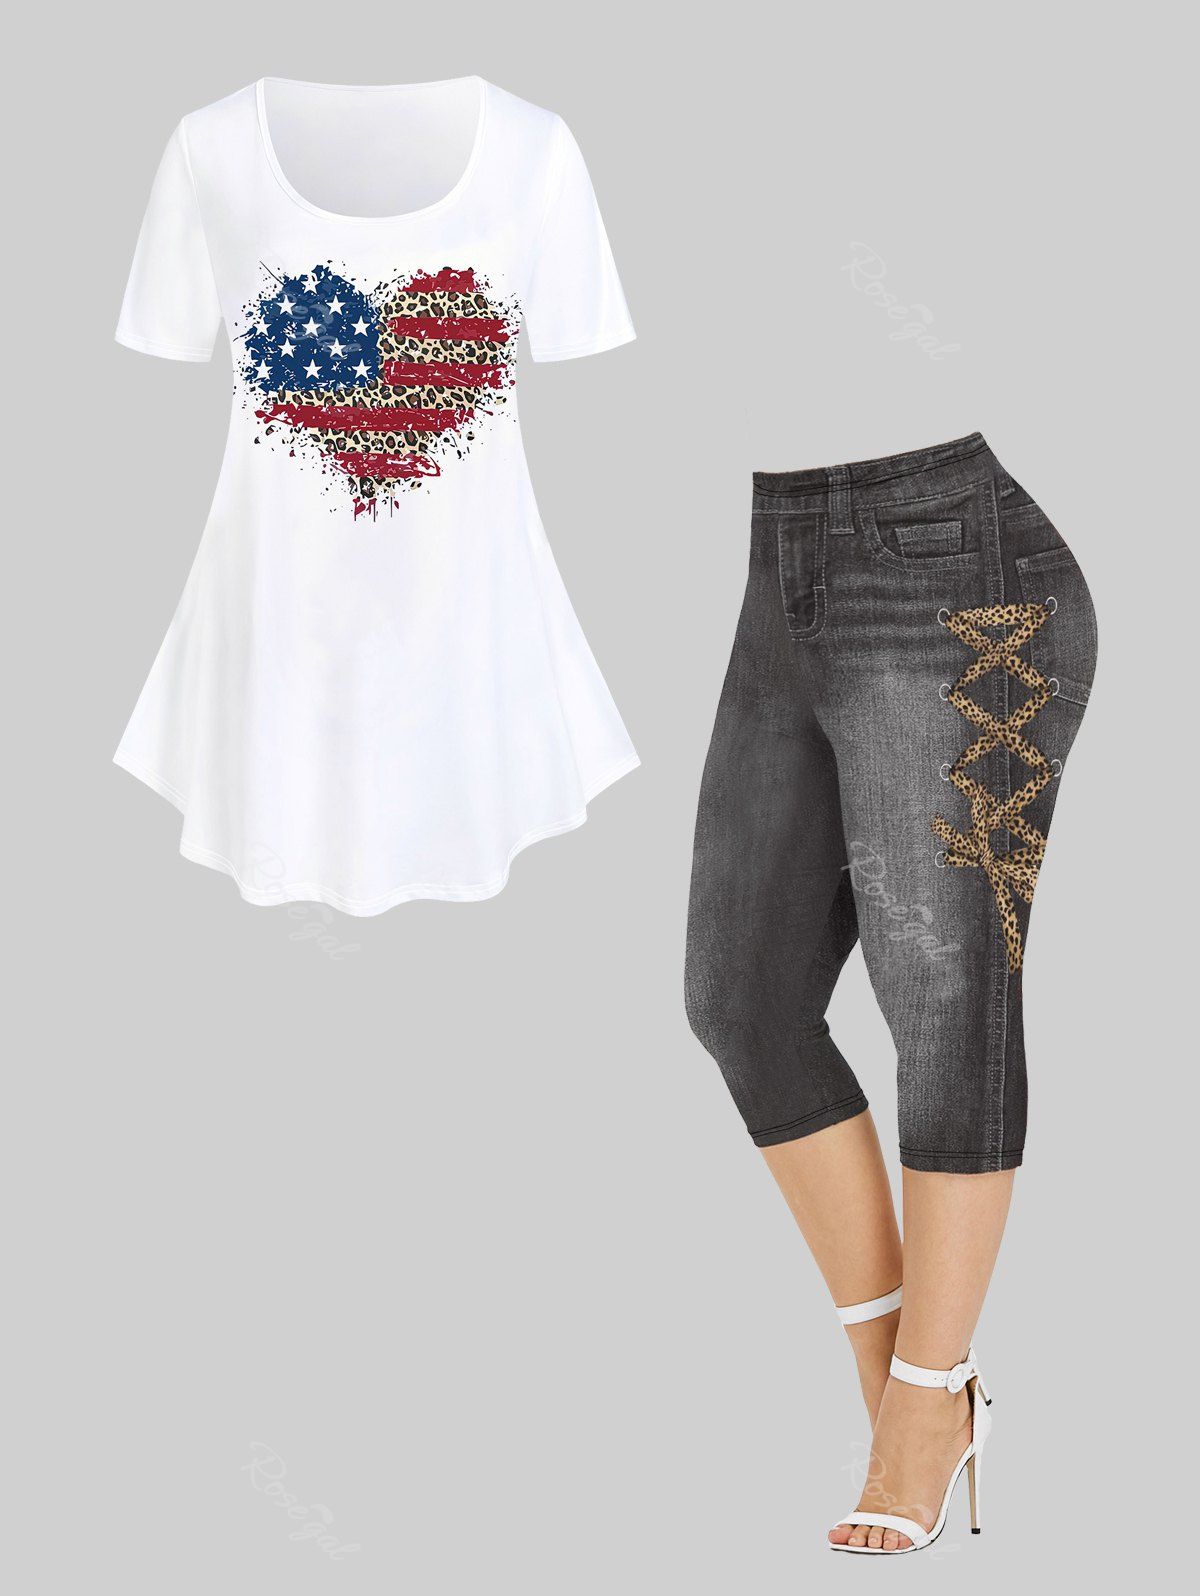 Sale American Flag Leopard Heart Printed Patriotic Top and 3D Leopard Lace-up Jeans Printed Capri Jeggings Plus Size Outfits  